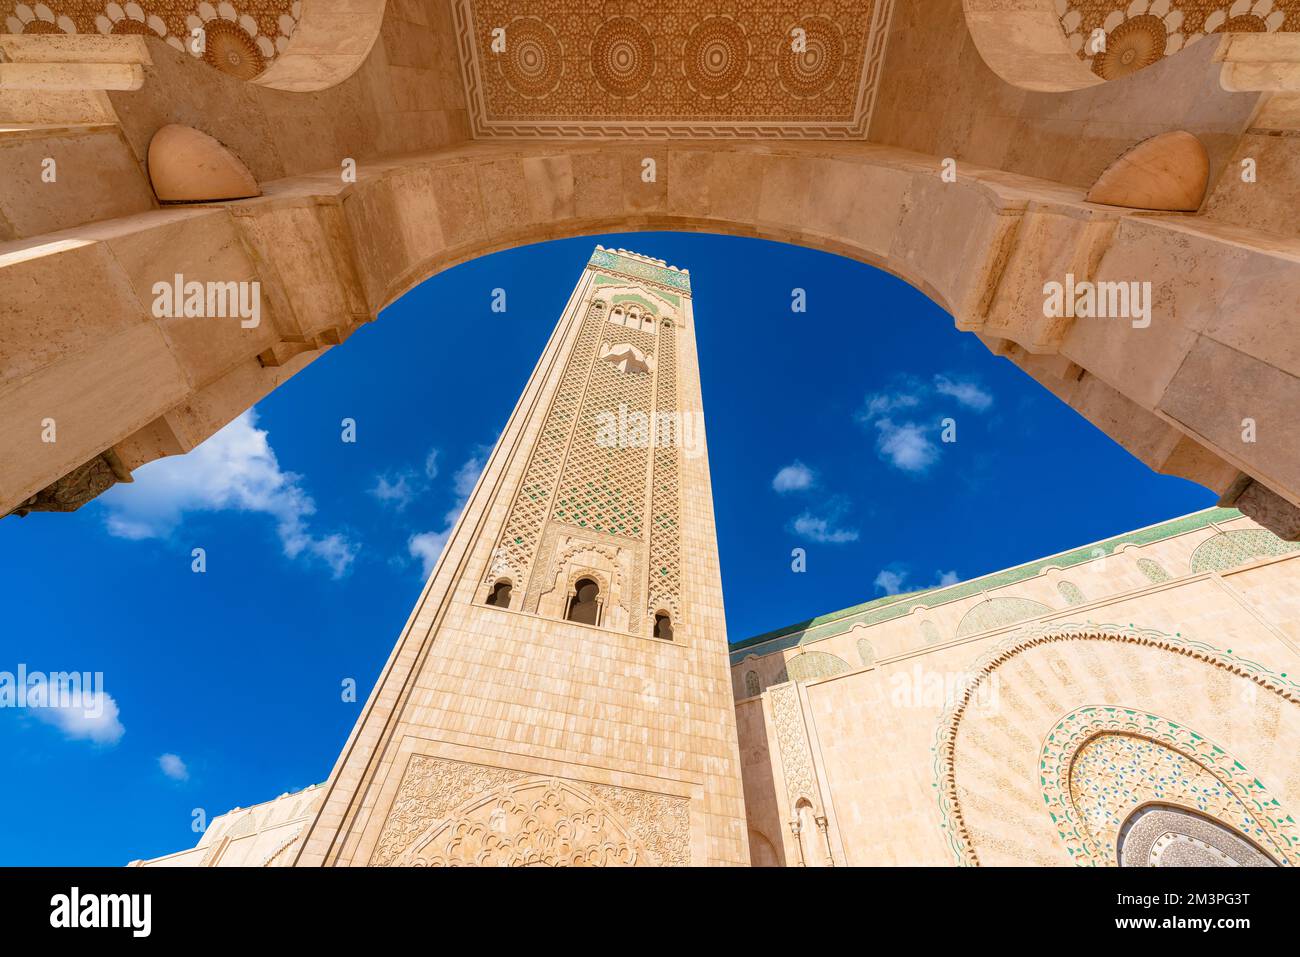 Extreme low angle view of the facade and the tall minaret of Hassan II mosque in Casablanca, Morocco Stock Photo